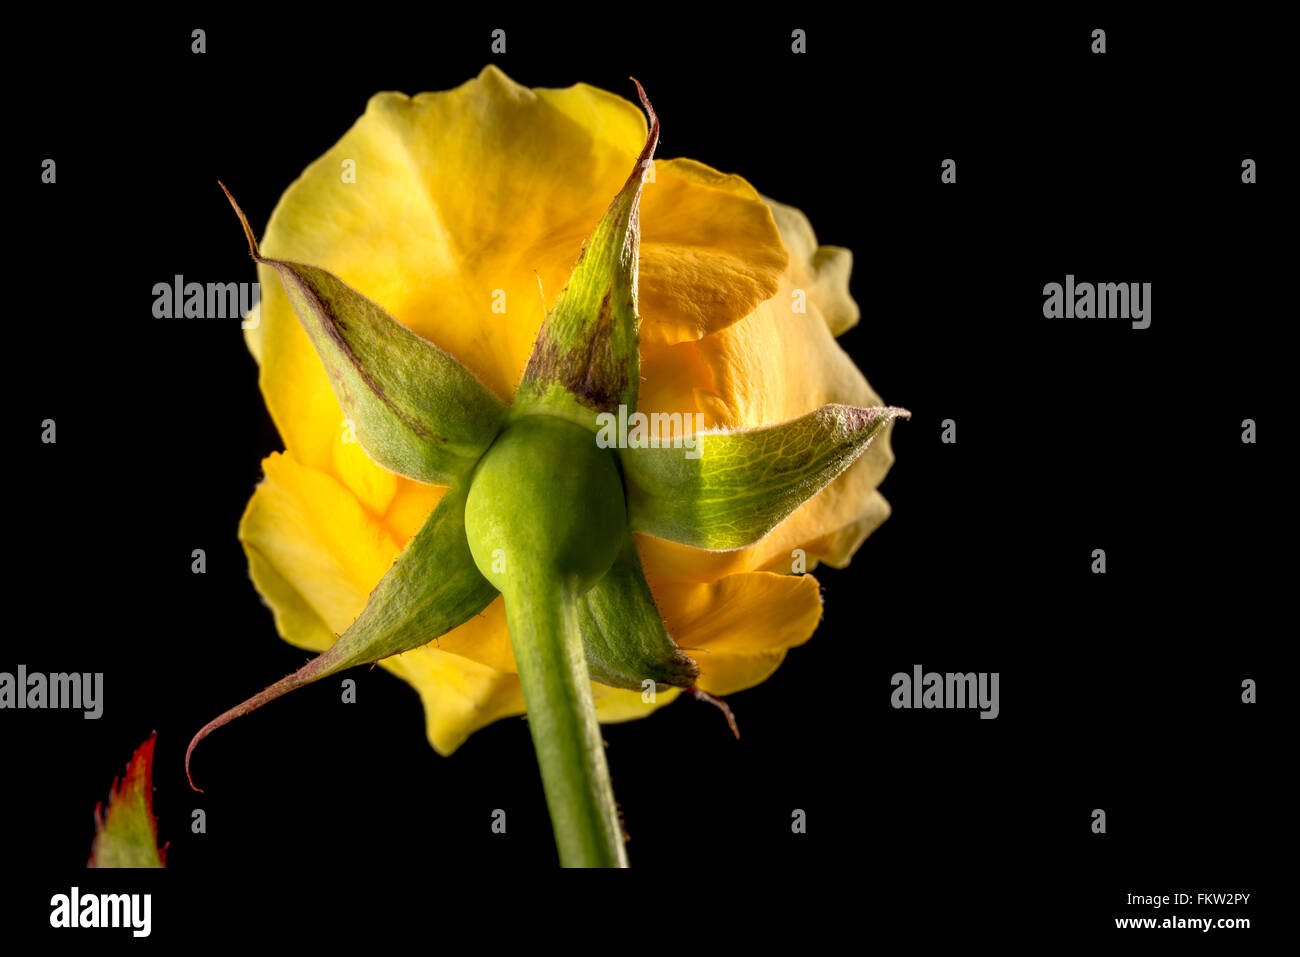 Sepals and peduncle  of a yellow rose on black background Stock Photo